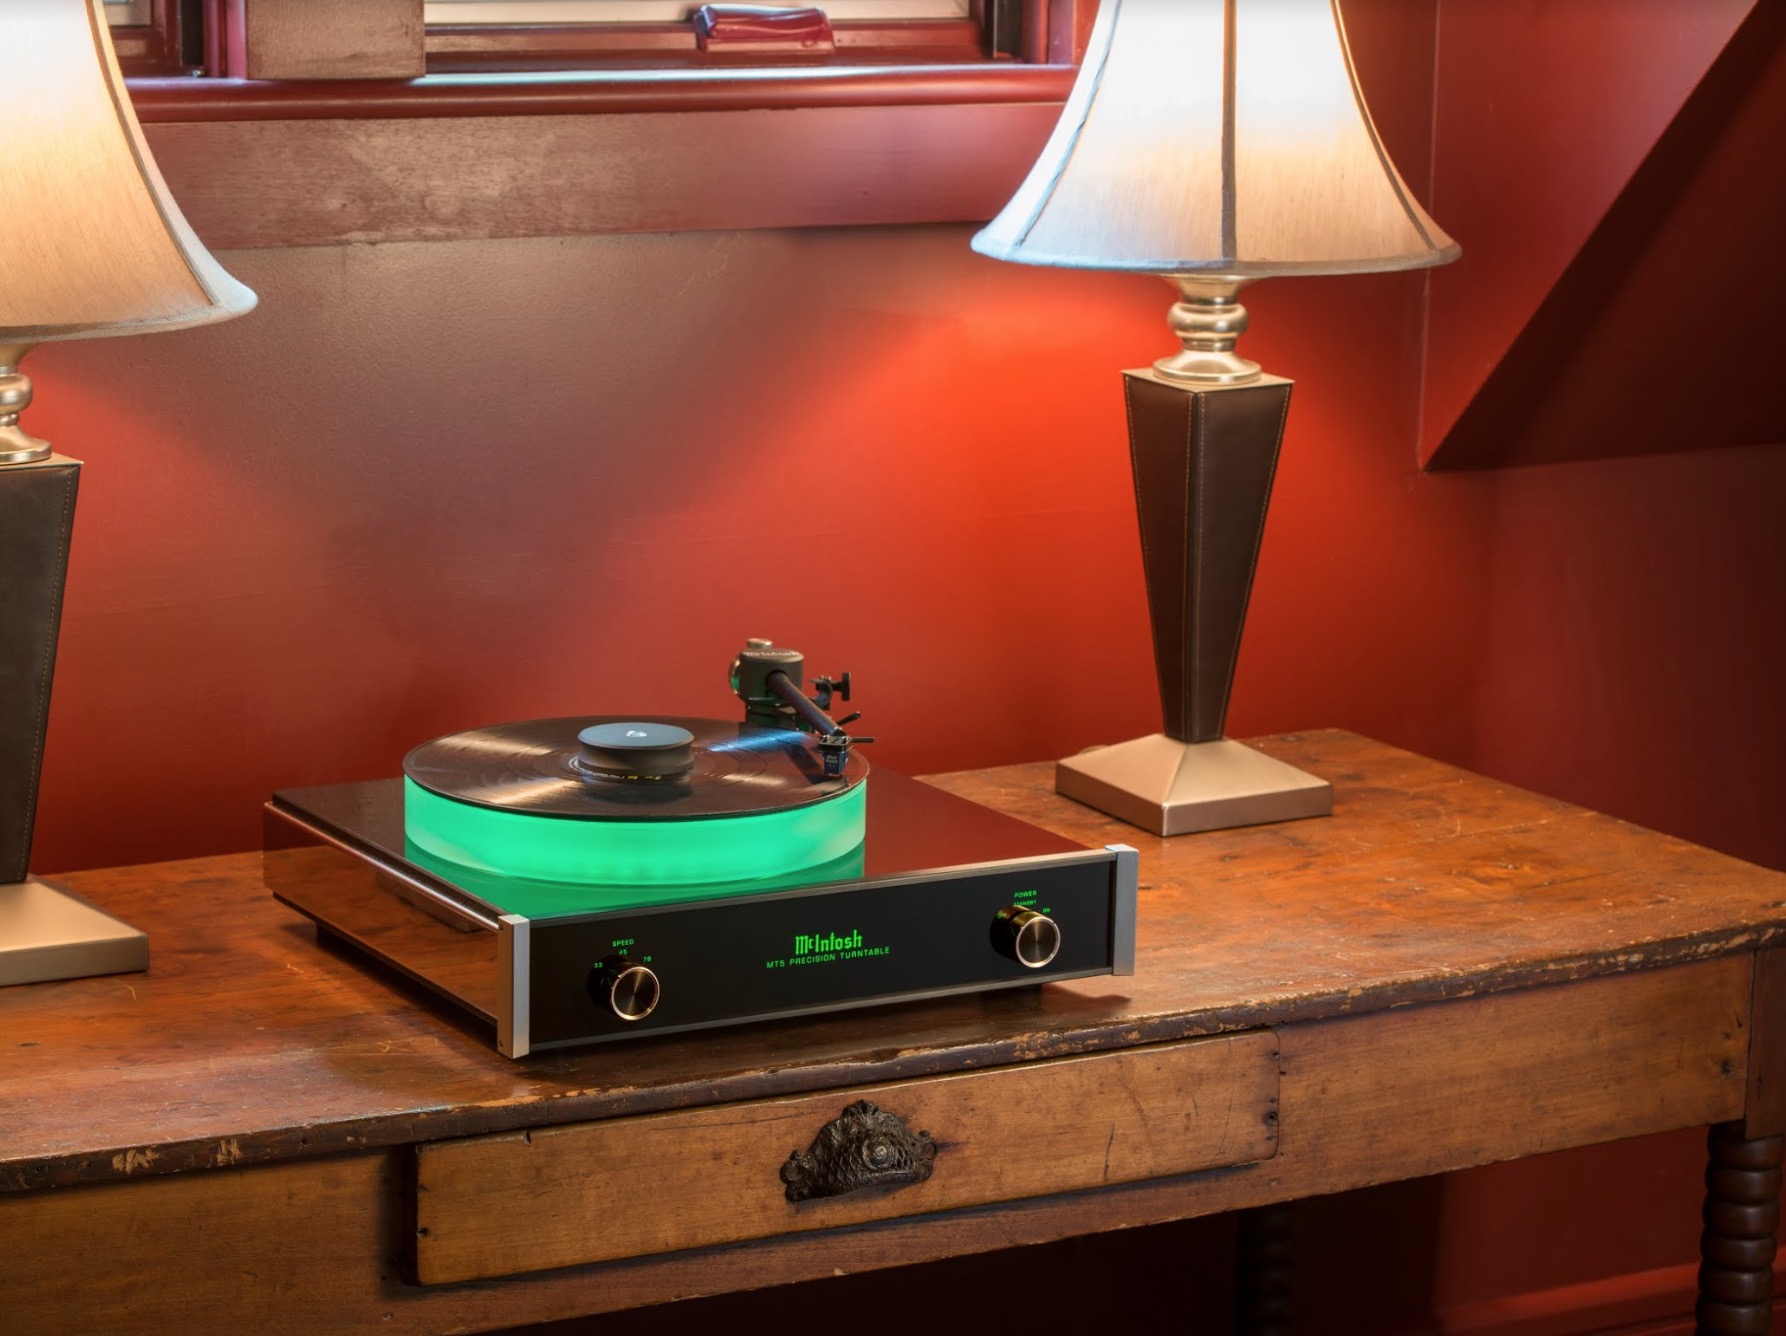 McIntosh MT5 Turntable: Turning Grooves Green